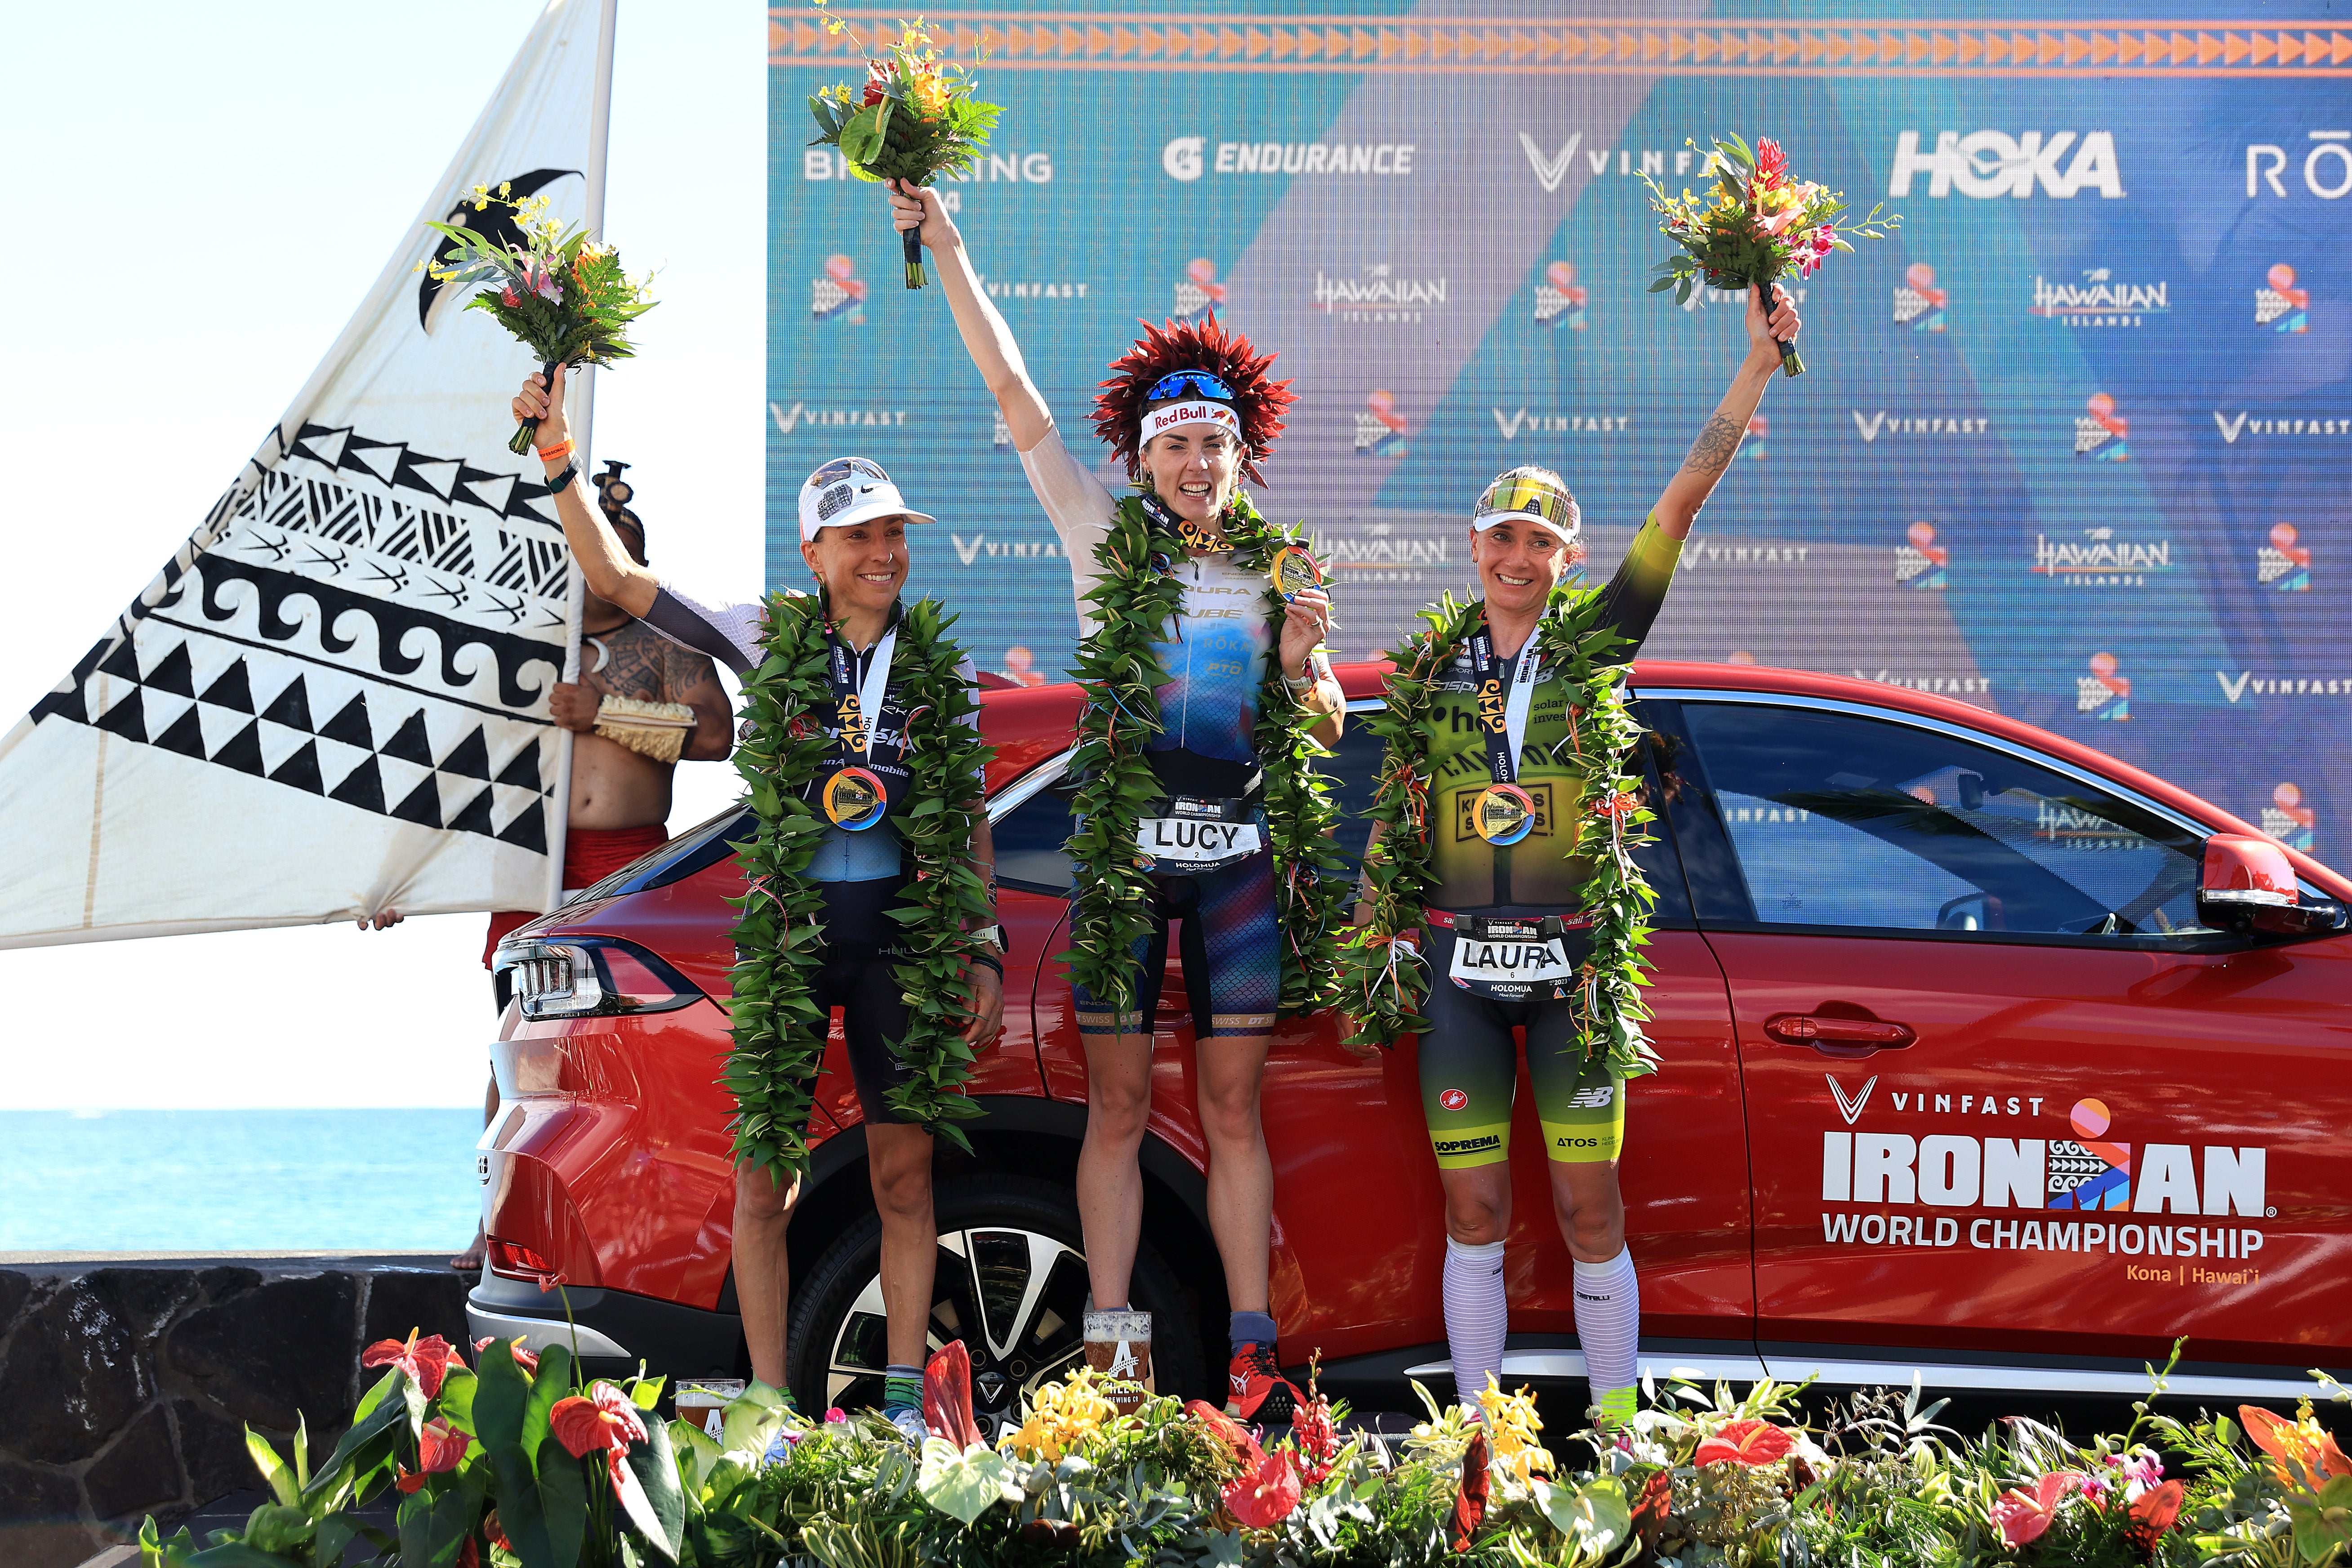 Lucy Charles-Barclay became Ironman World Champion in October